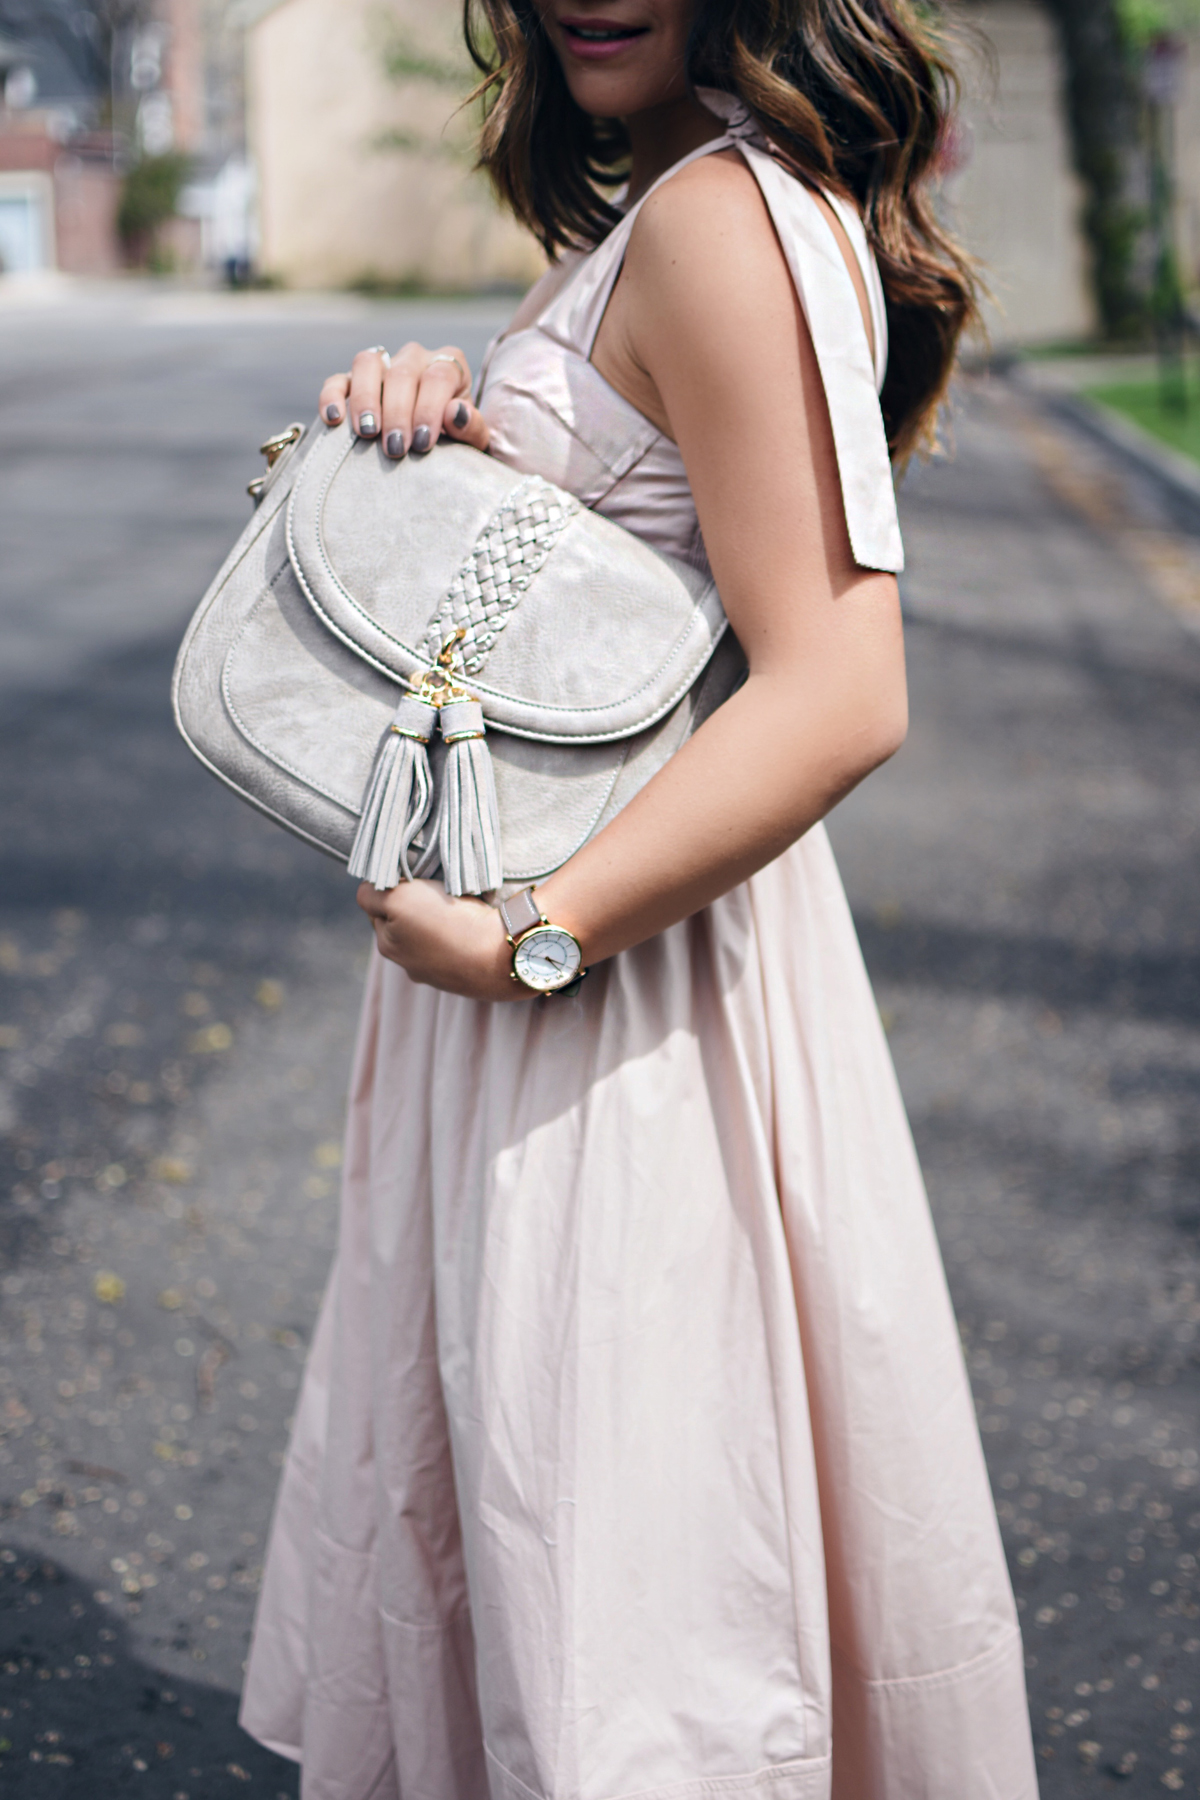 Carolina Hellal of Chic Talk wearing Chicwish blush A lines dress, Steve Madden ankle strap sandals and Moda Luxe bag